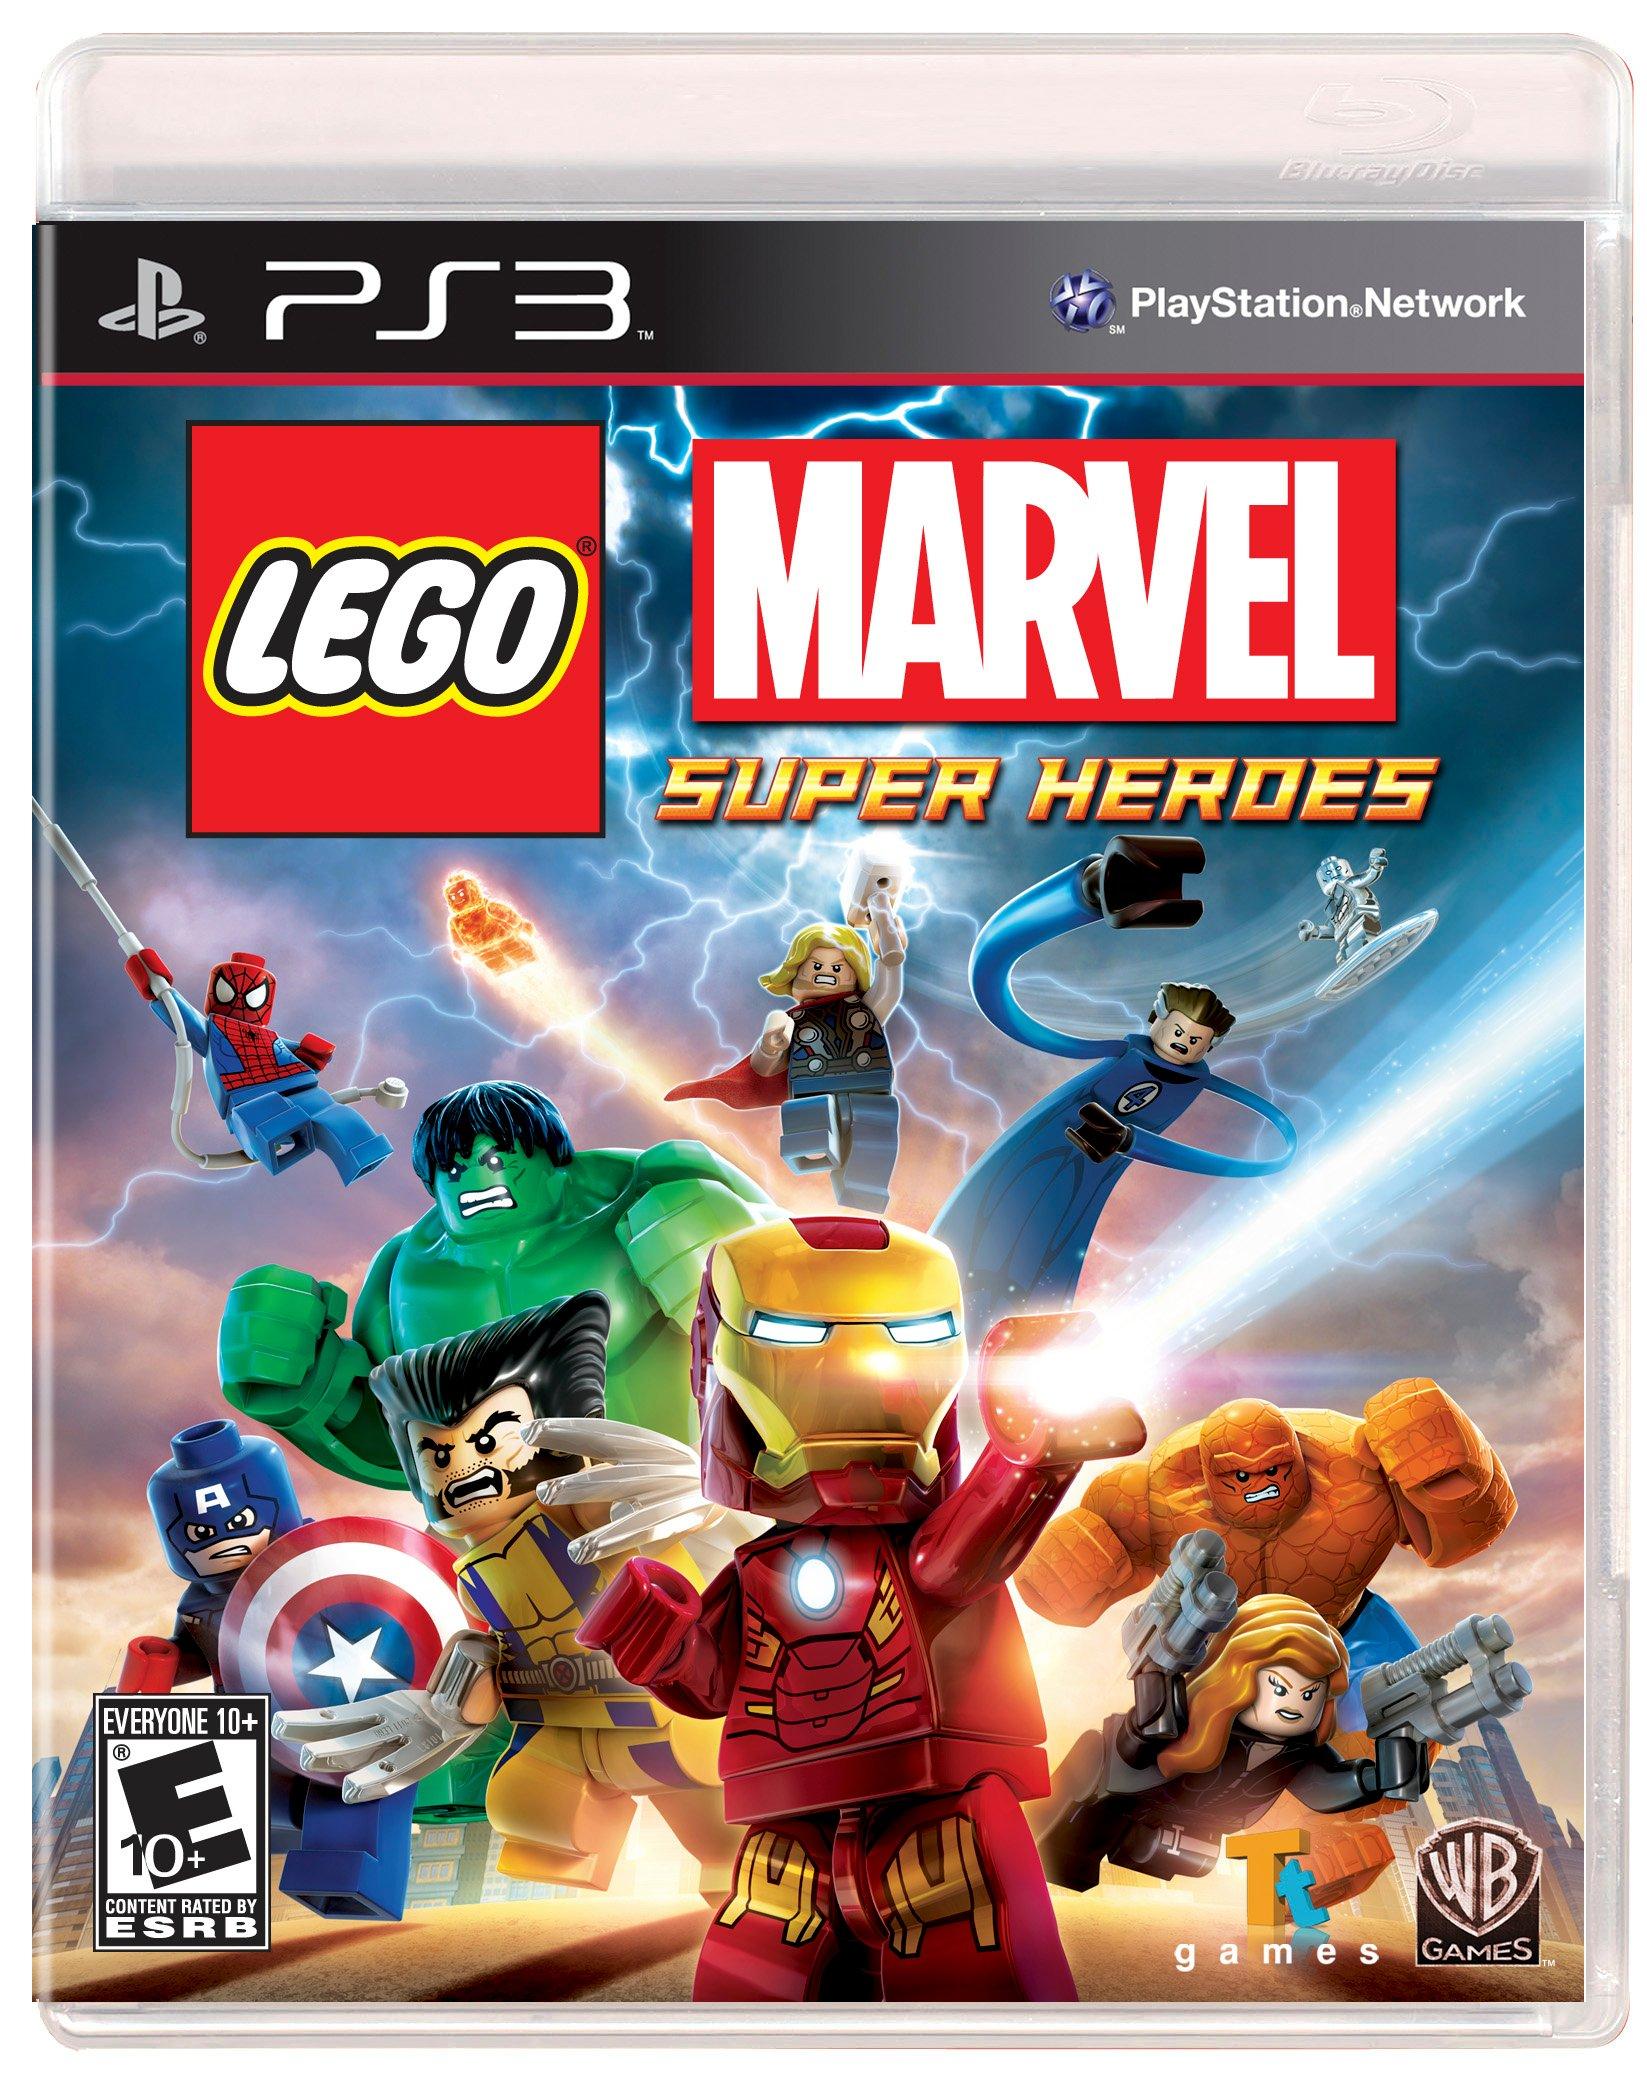 ps3 lego games for sale